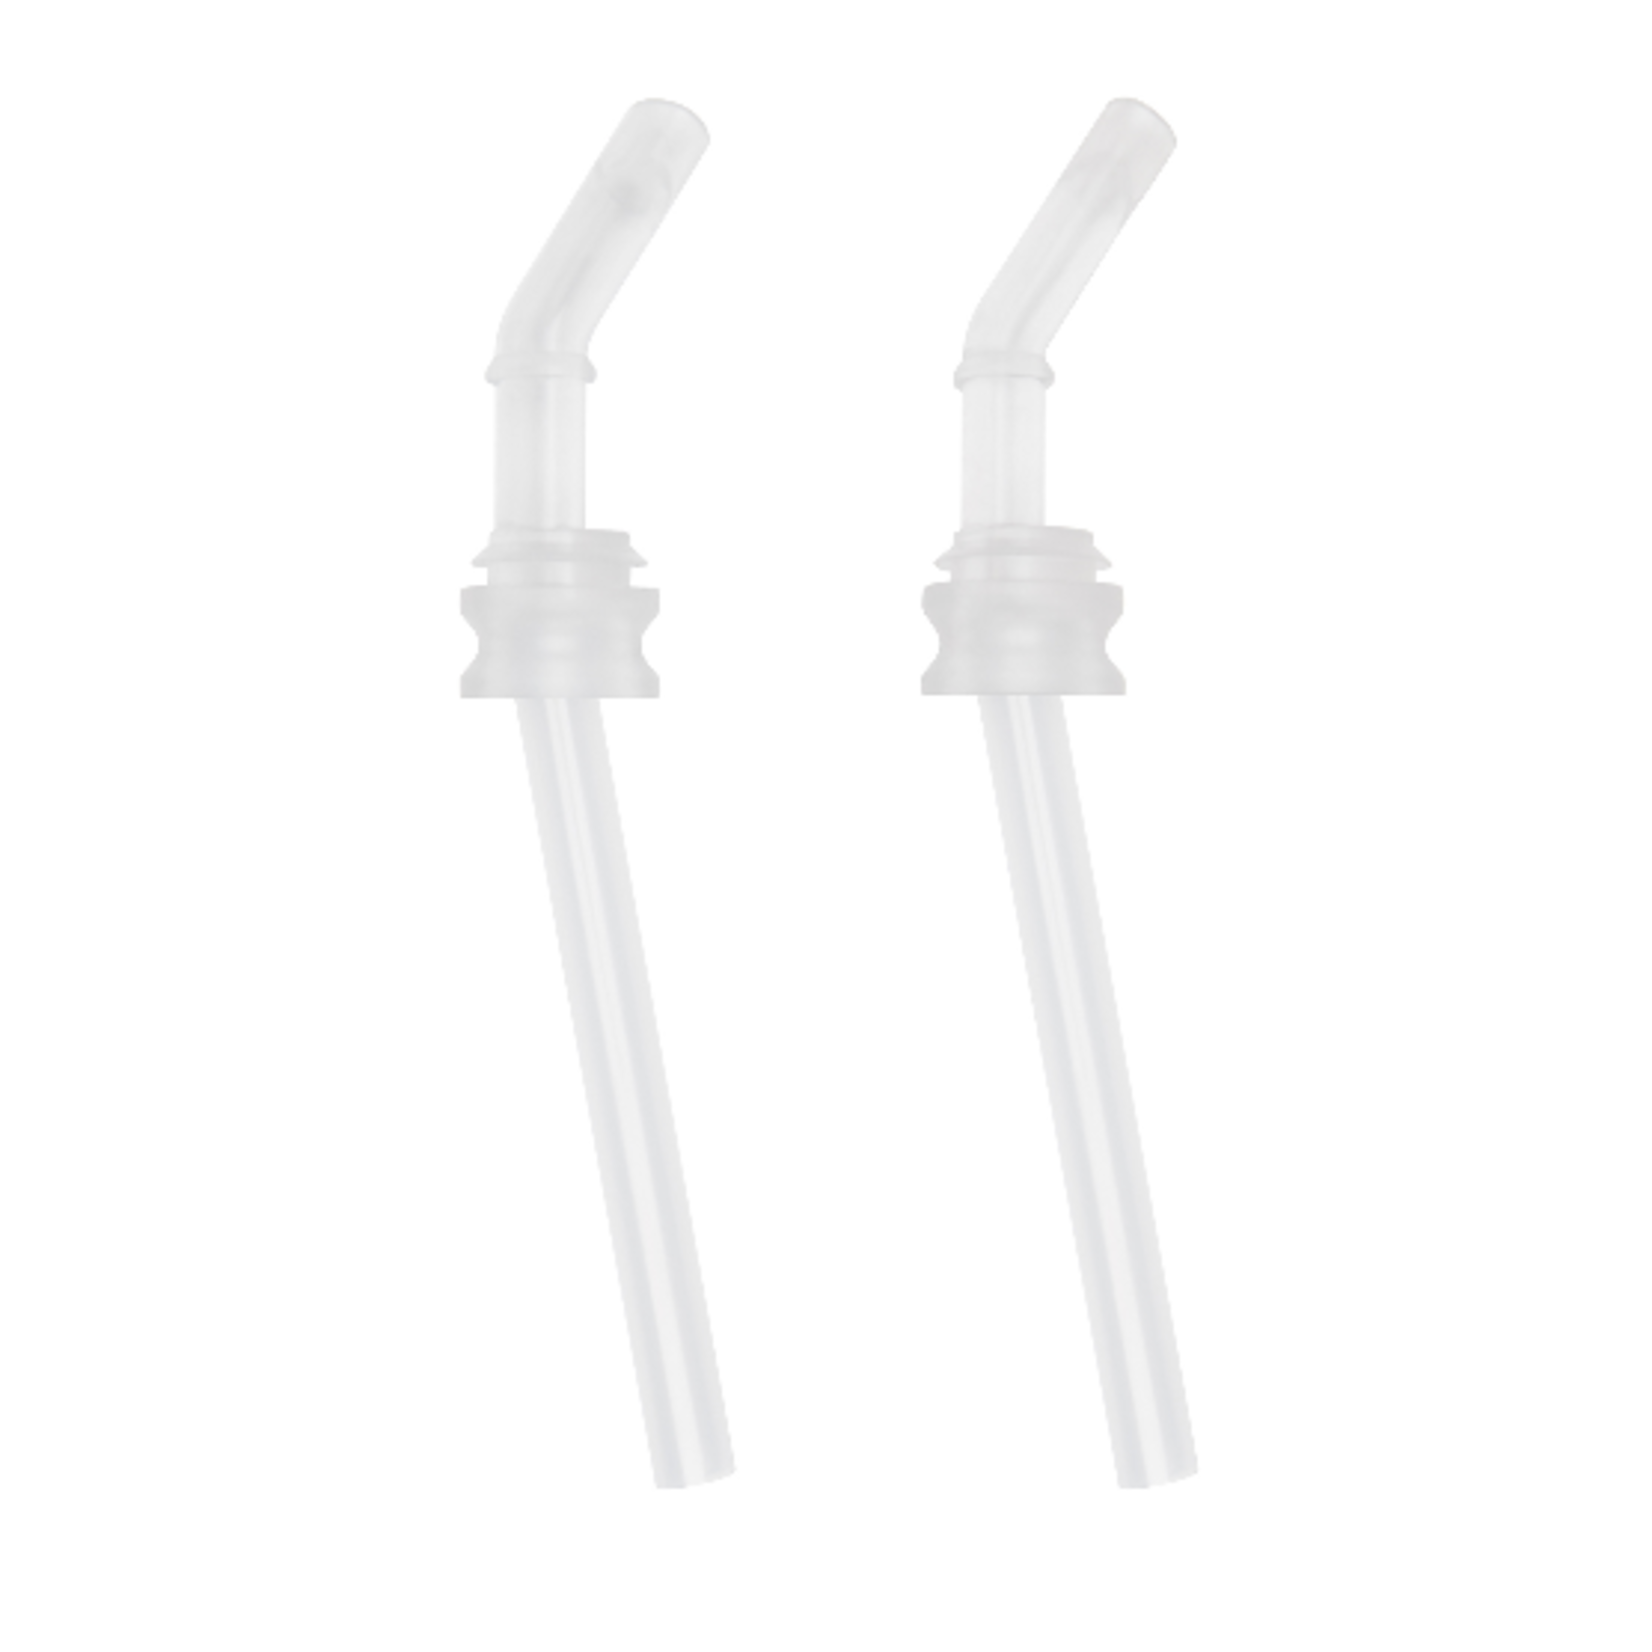 OXO Tot OXO TOT TRANSITION CUP REPLACEMENT STRAWS 2PK